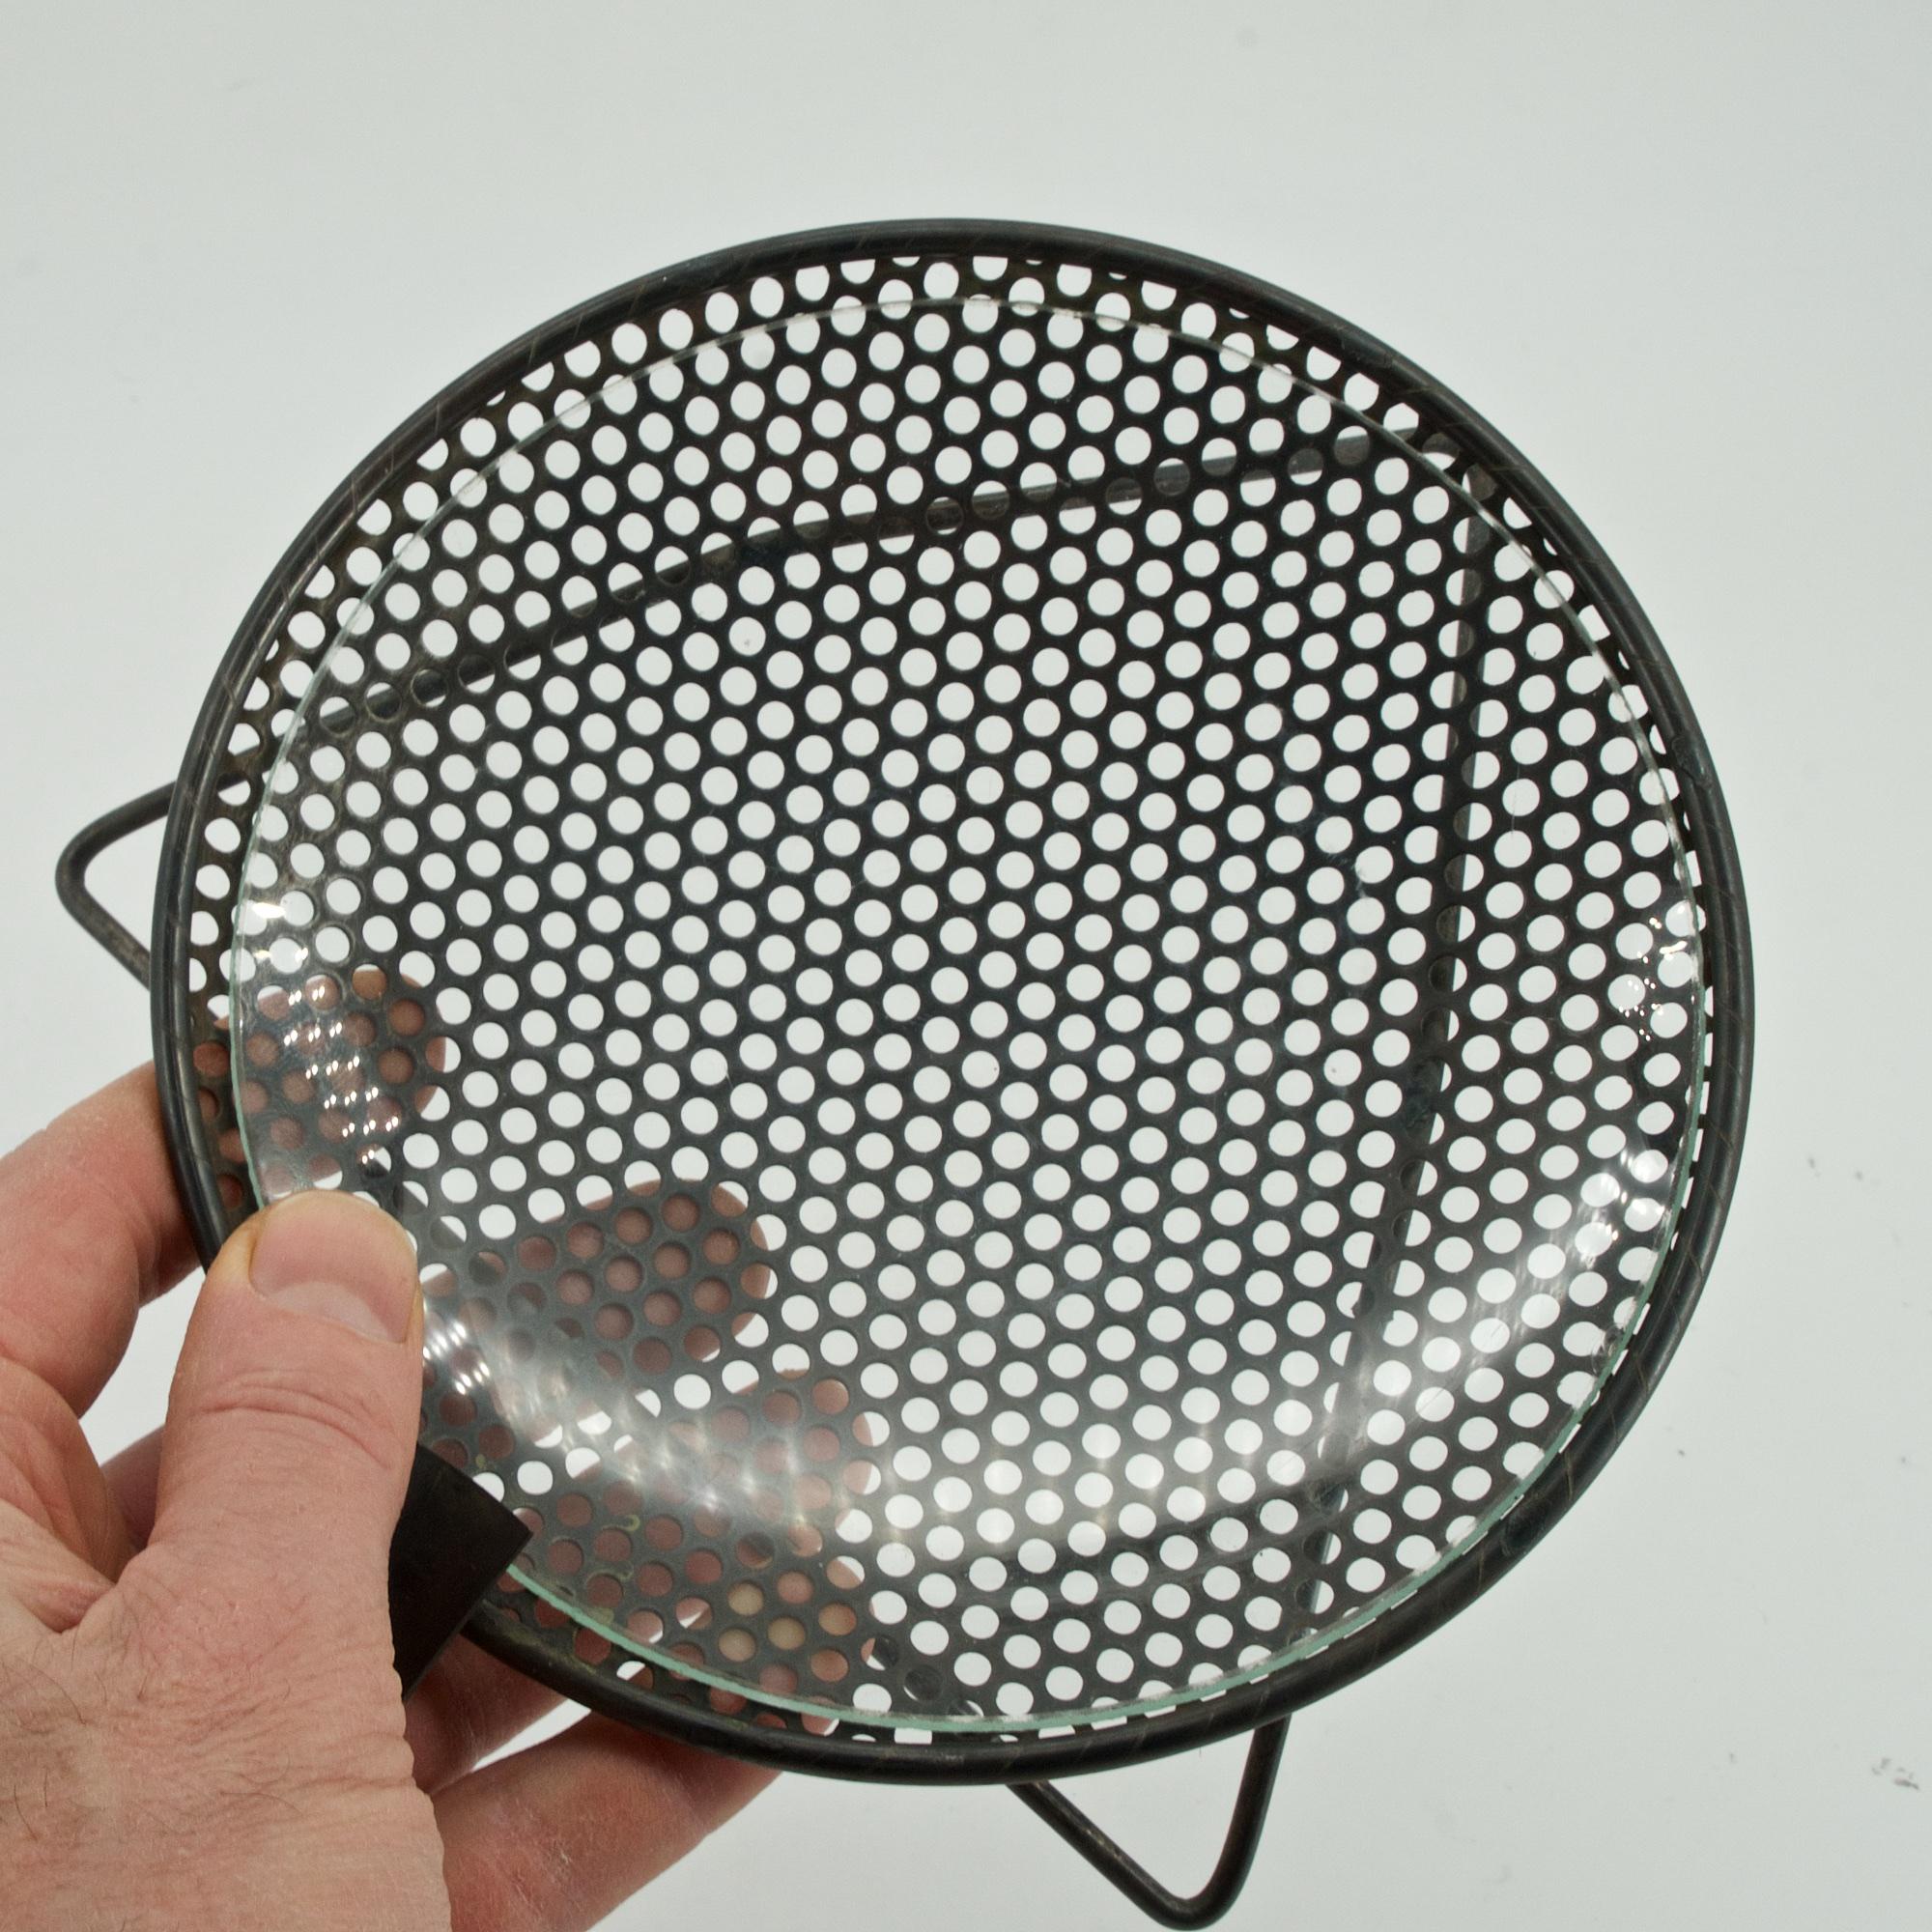 1950s Perforated Metal Atomic Dish Ashtray Nº S30 by Richard Galef Ravenware For Sale 2